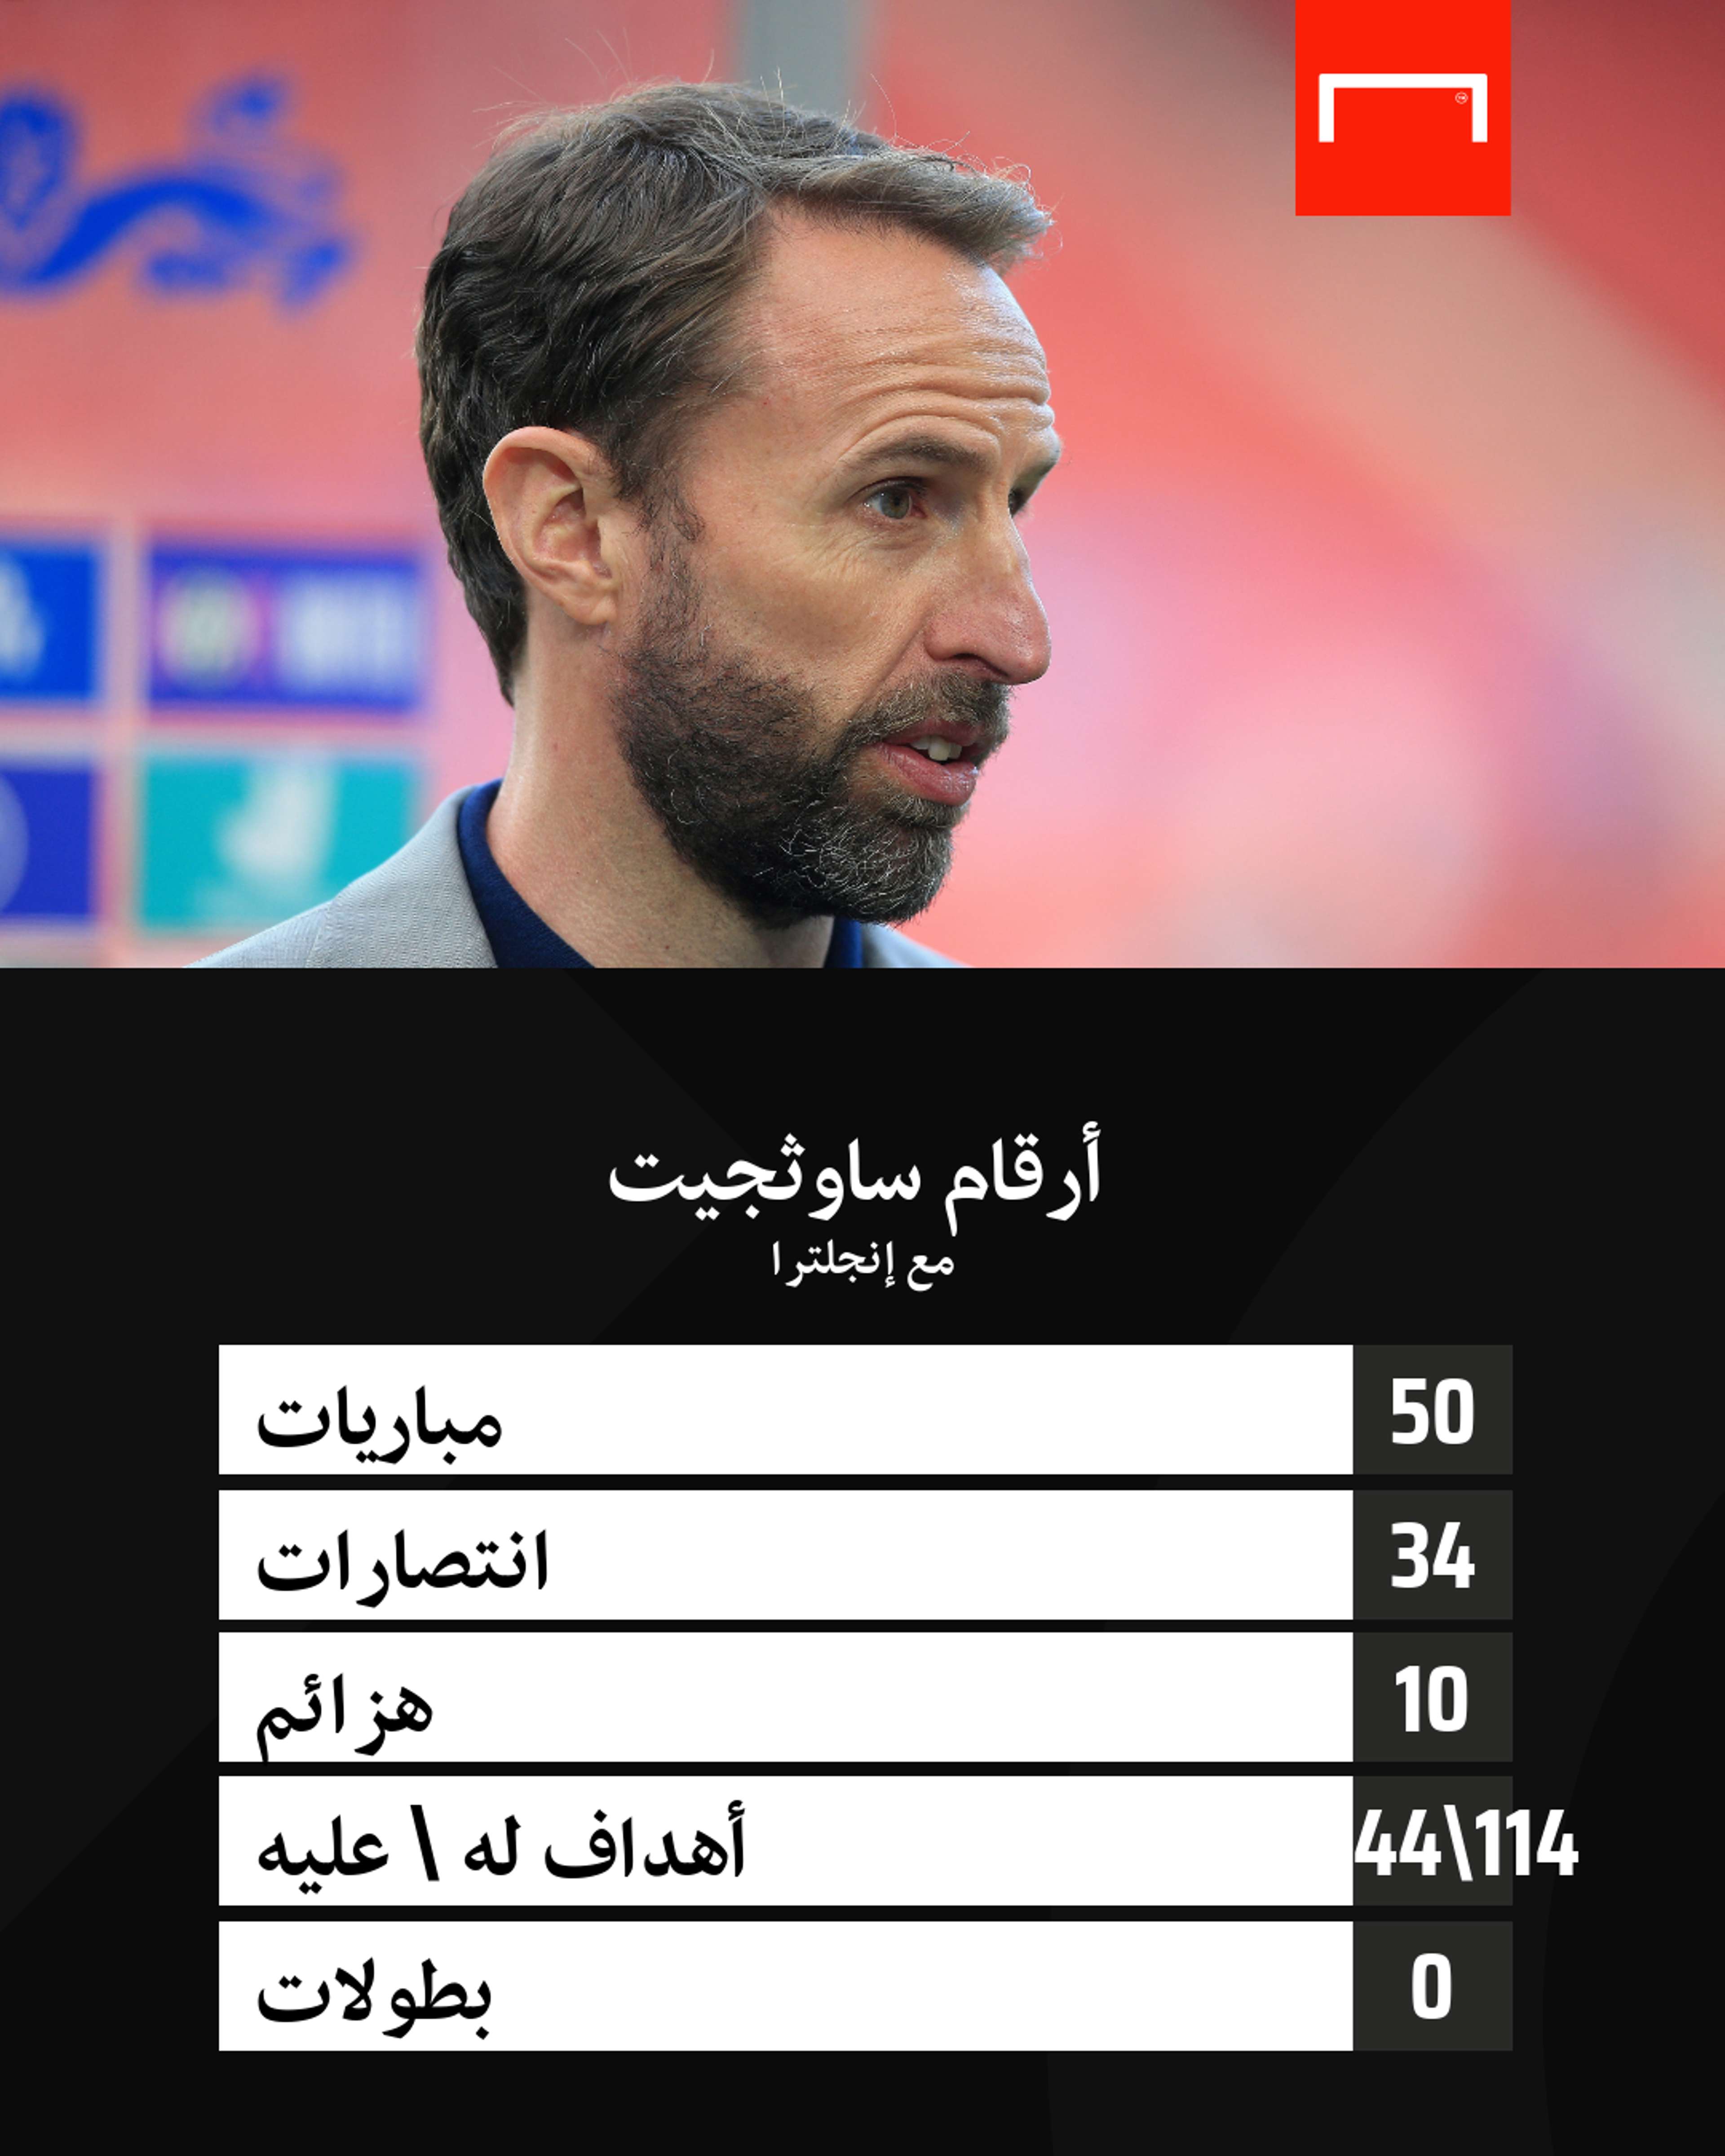 Southgate numbers with England